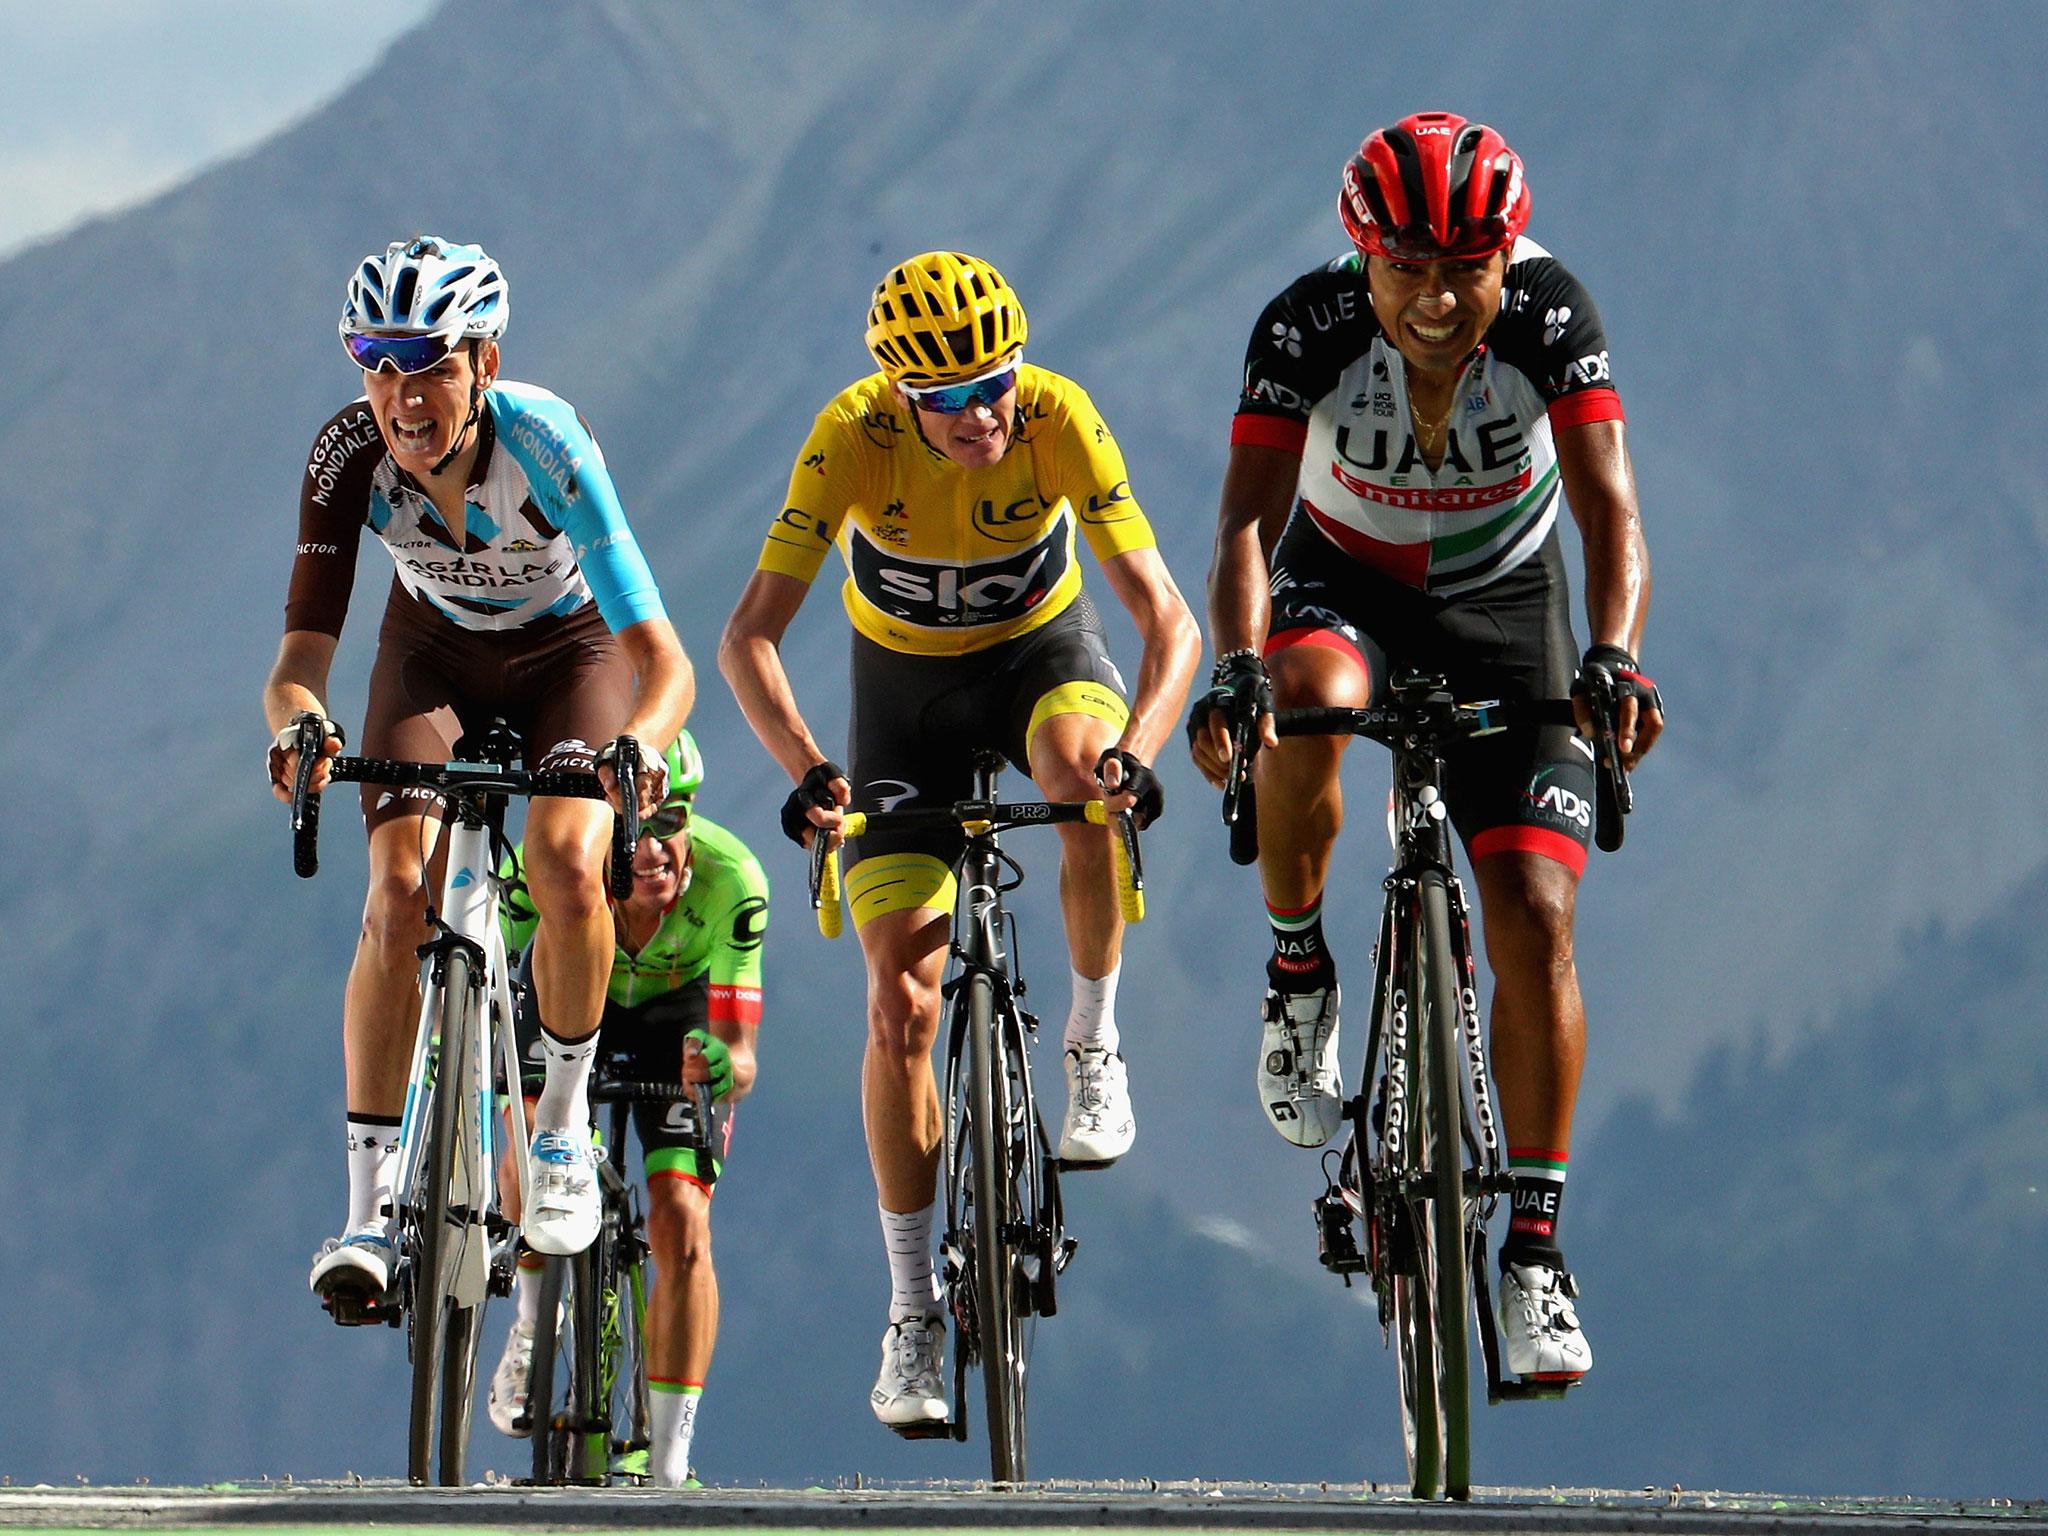 Chris Froome in action during Stage 18 of the Tour